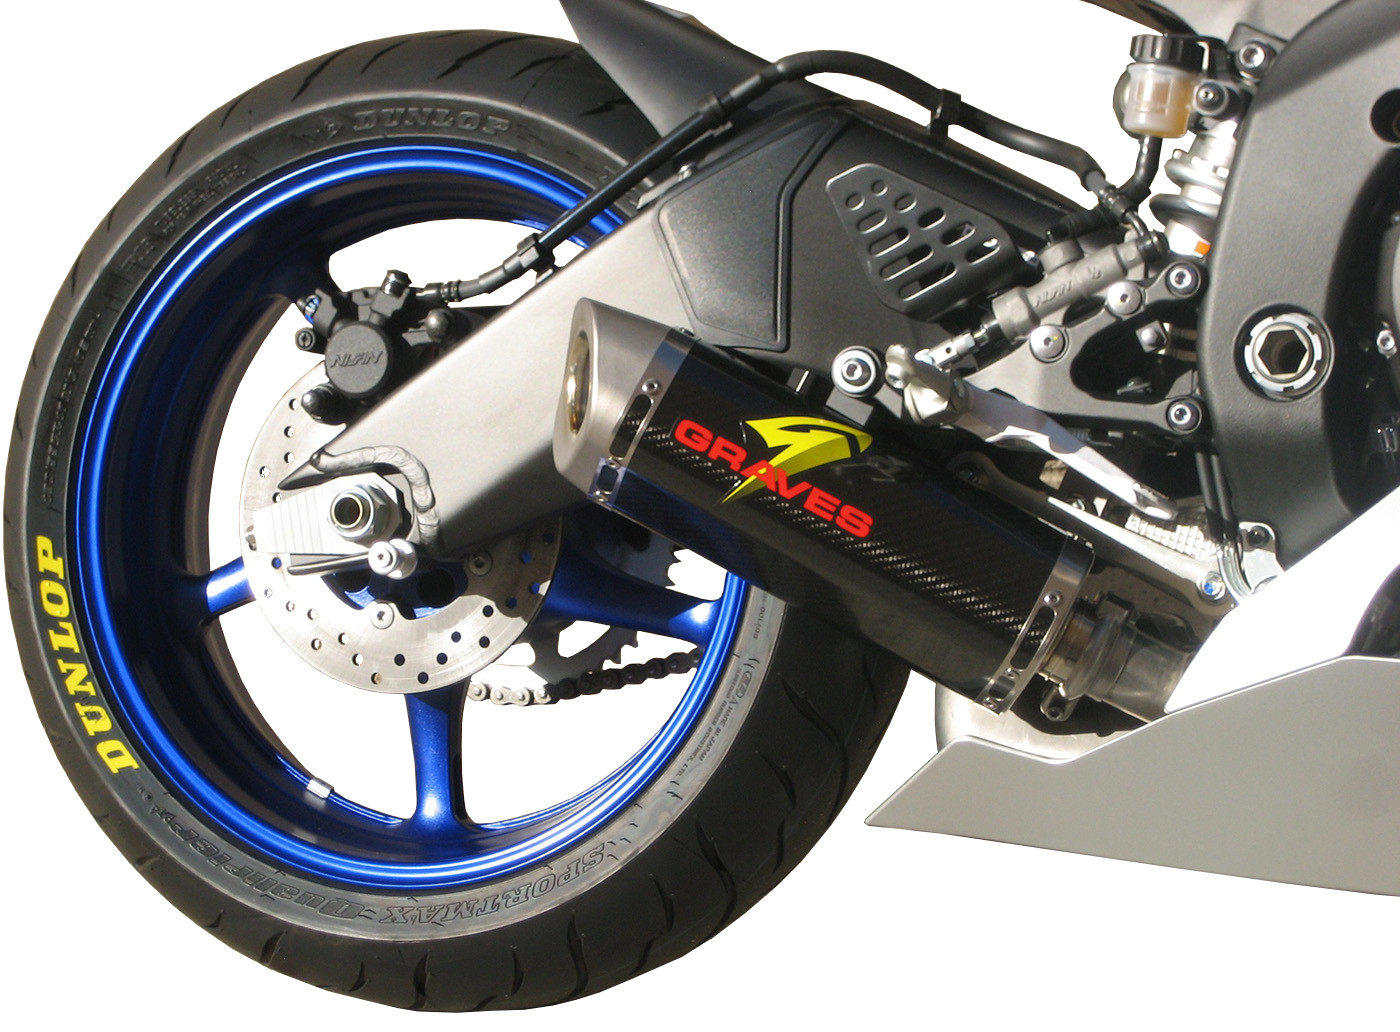 Carbon Fiber Slip On Exhaust - For 06-20 Yamaha R6 - Click Image to Close